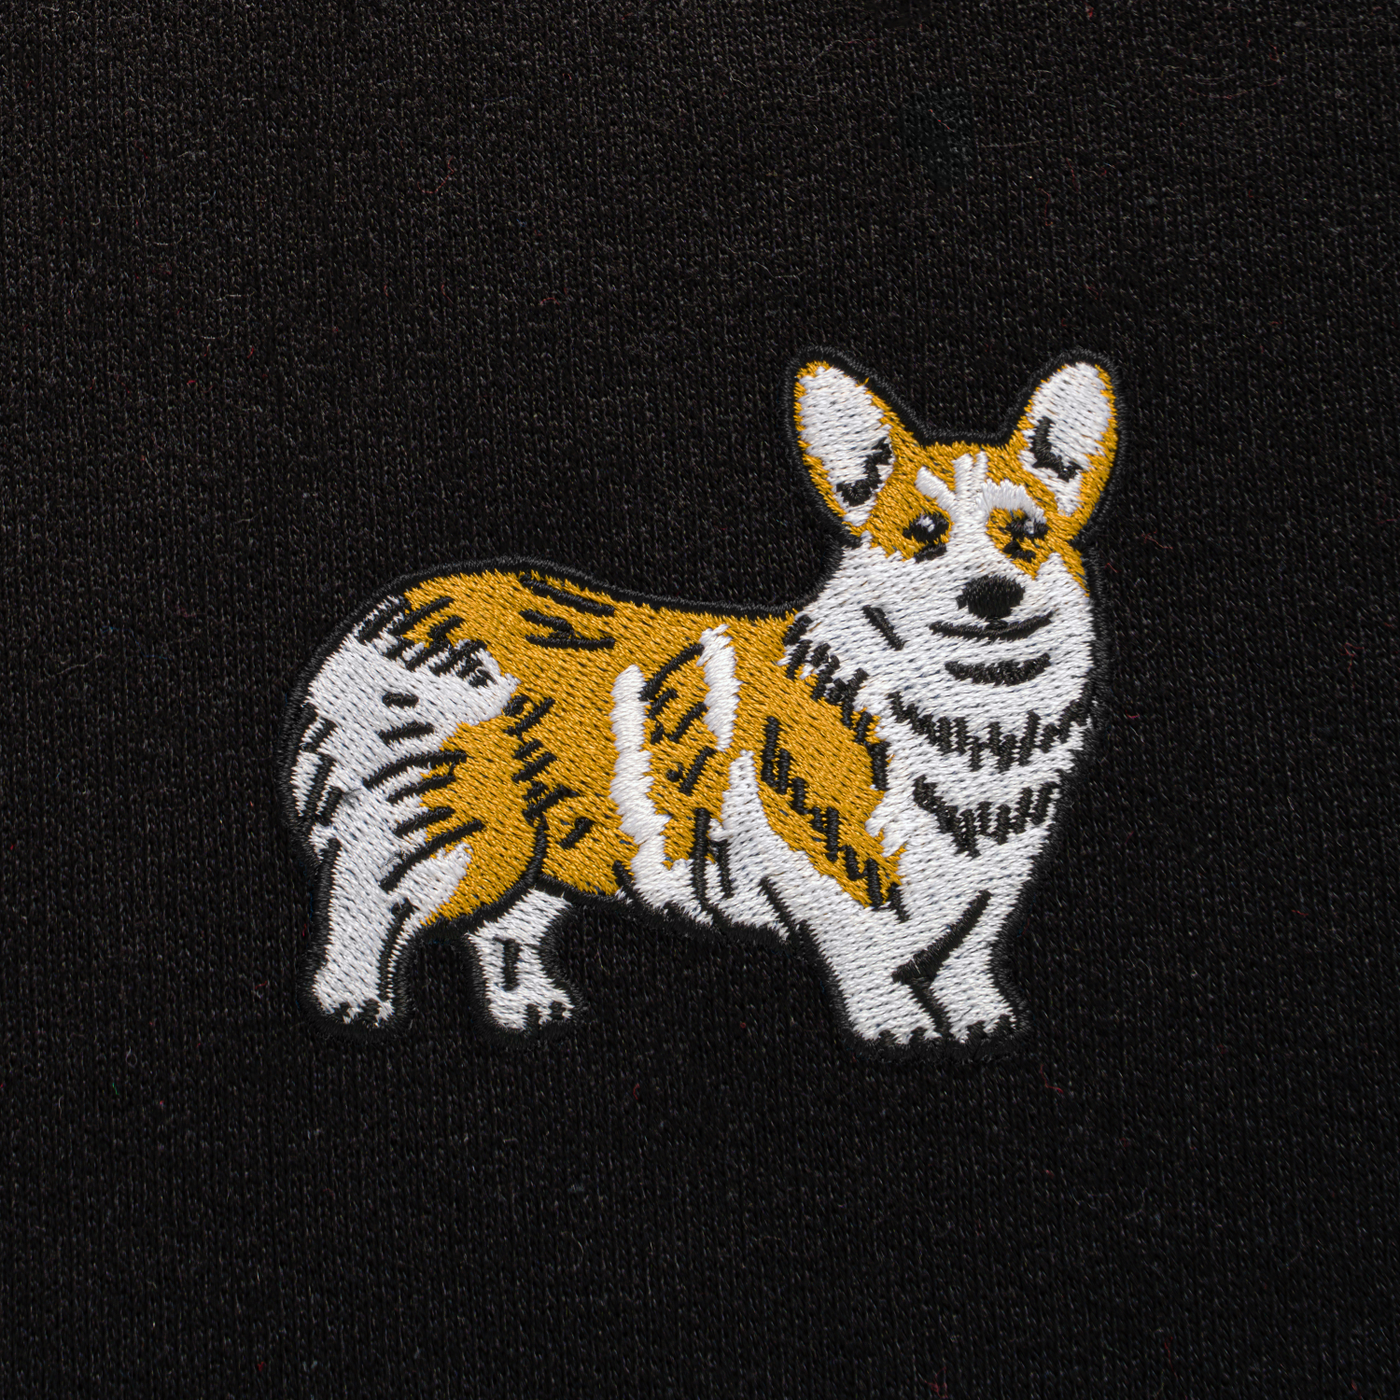 Bobby's Planet Men's Embroidered Corgi Sweatshirt from Paws Dog Cat Animals Collection in Black Color#color_black